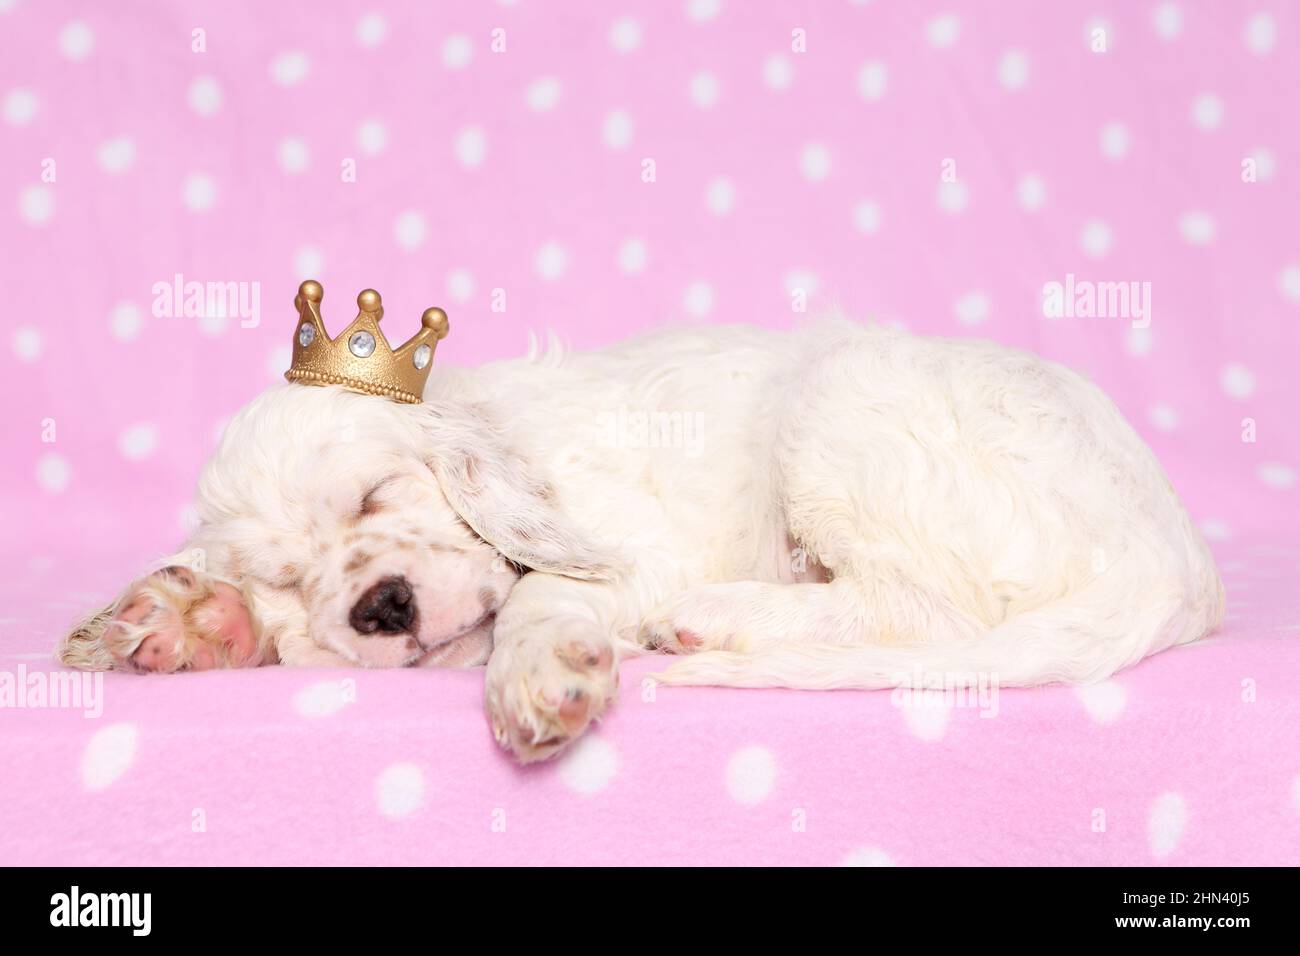 English Setter. Puppy sleeping on a pink blanket with polka dots, wearing a crown. Germany Stock Photo